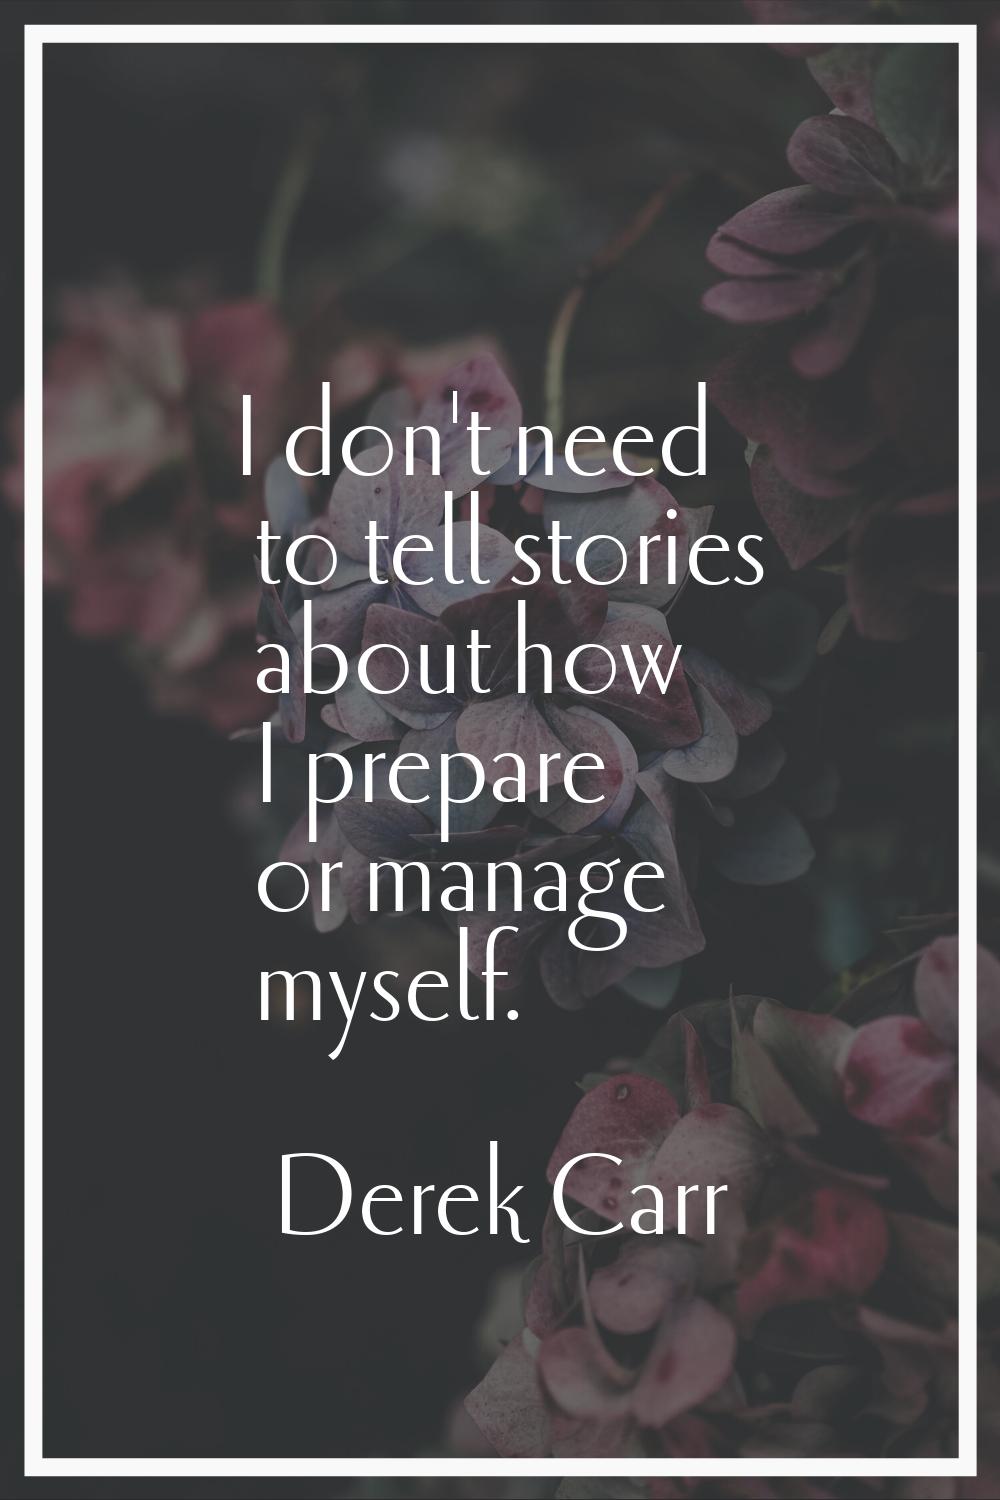 I don't need to tell stories about how I prepare or manage myself.